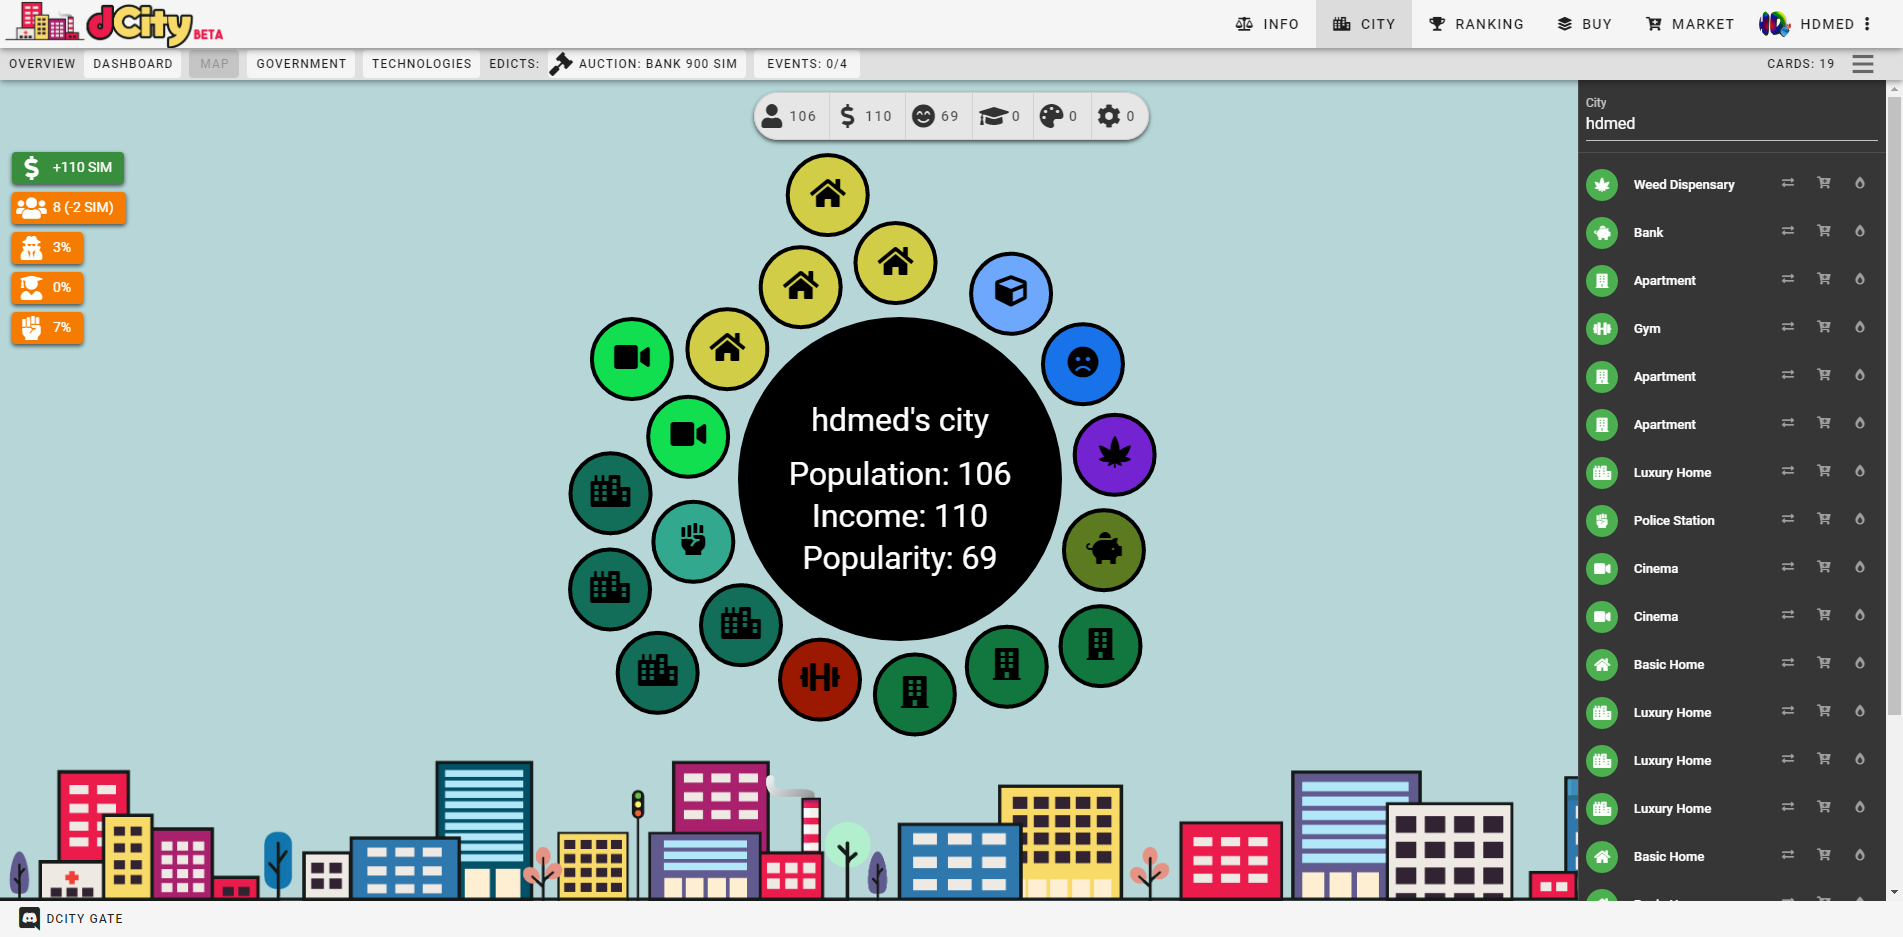 dCITY_io_City (1).png